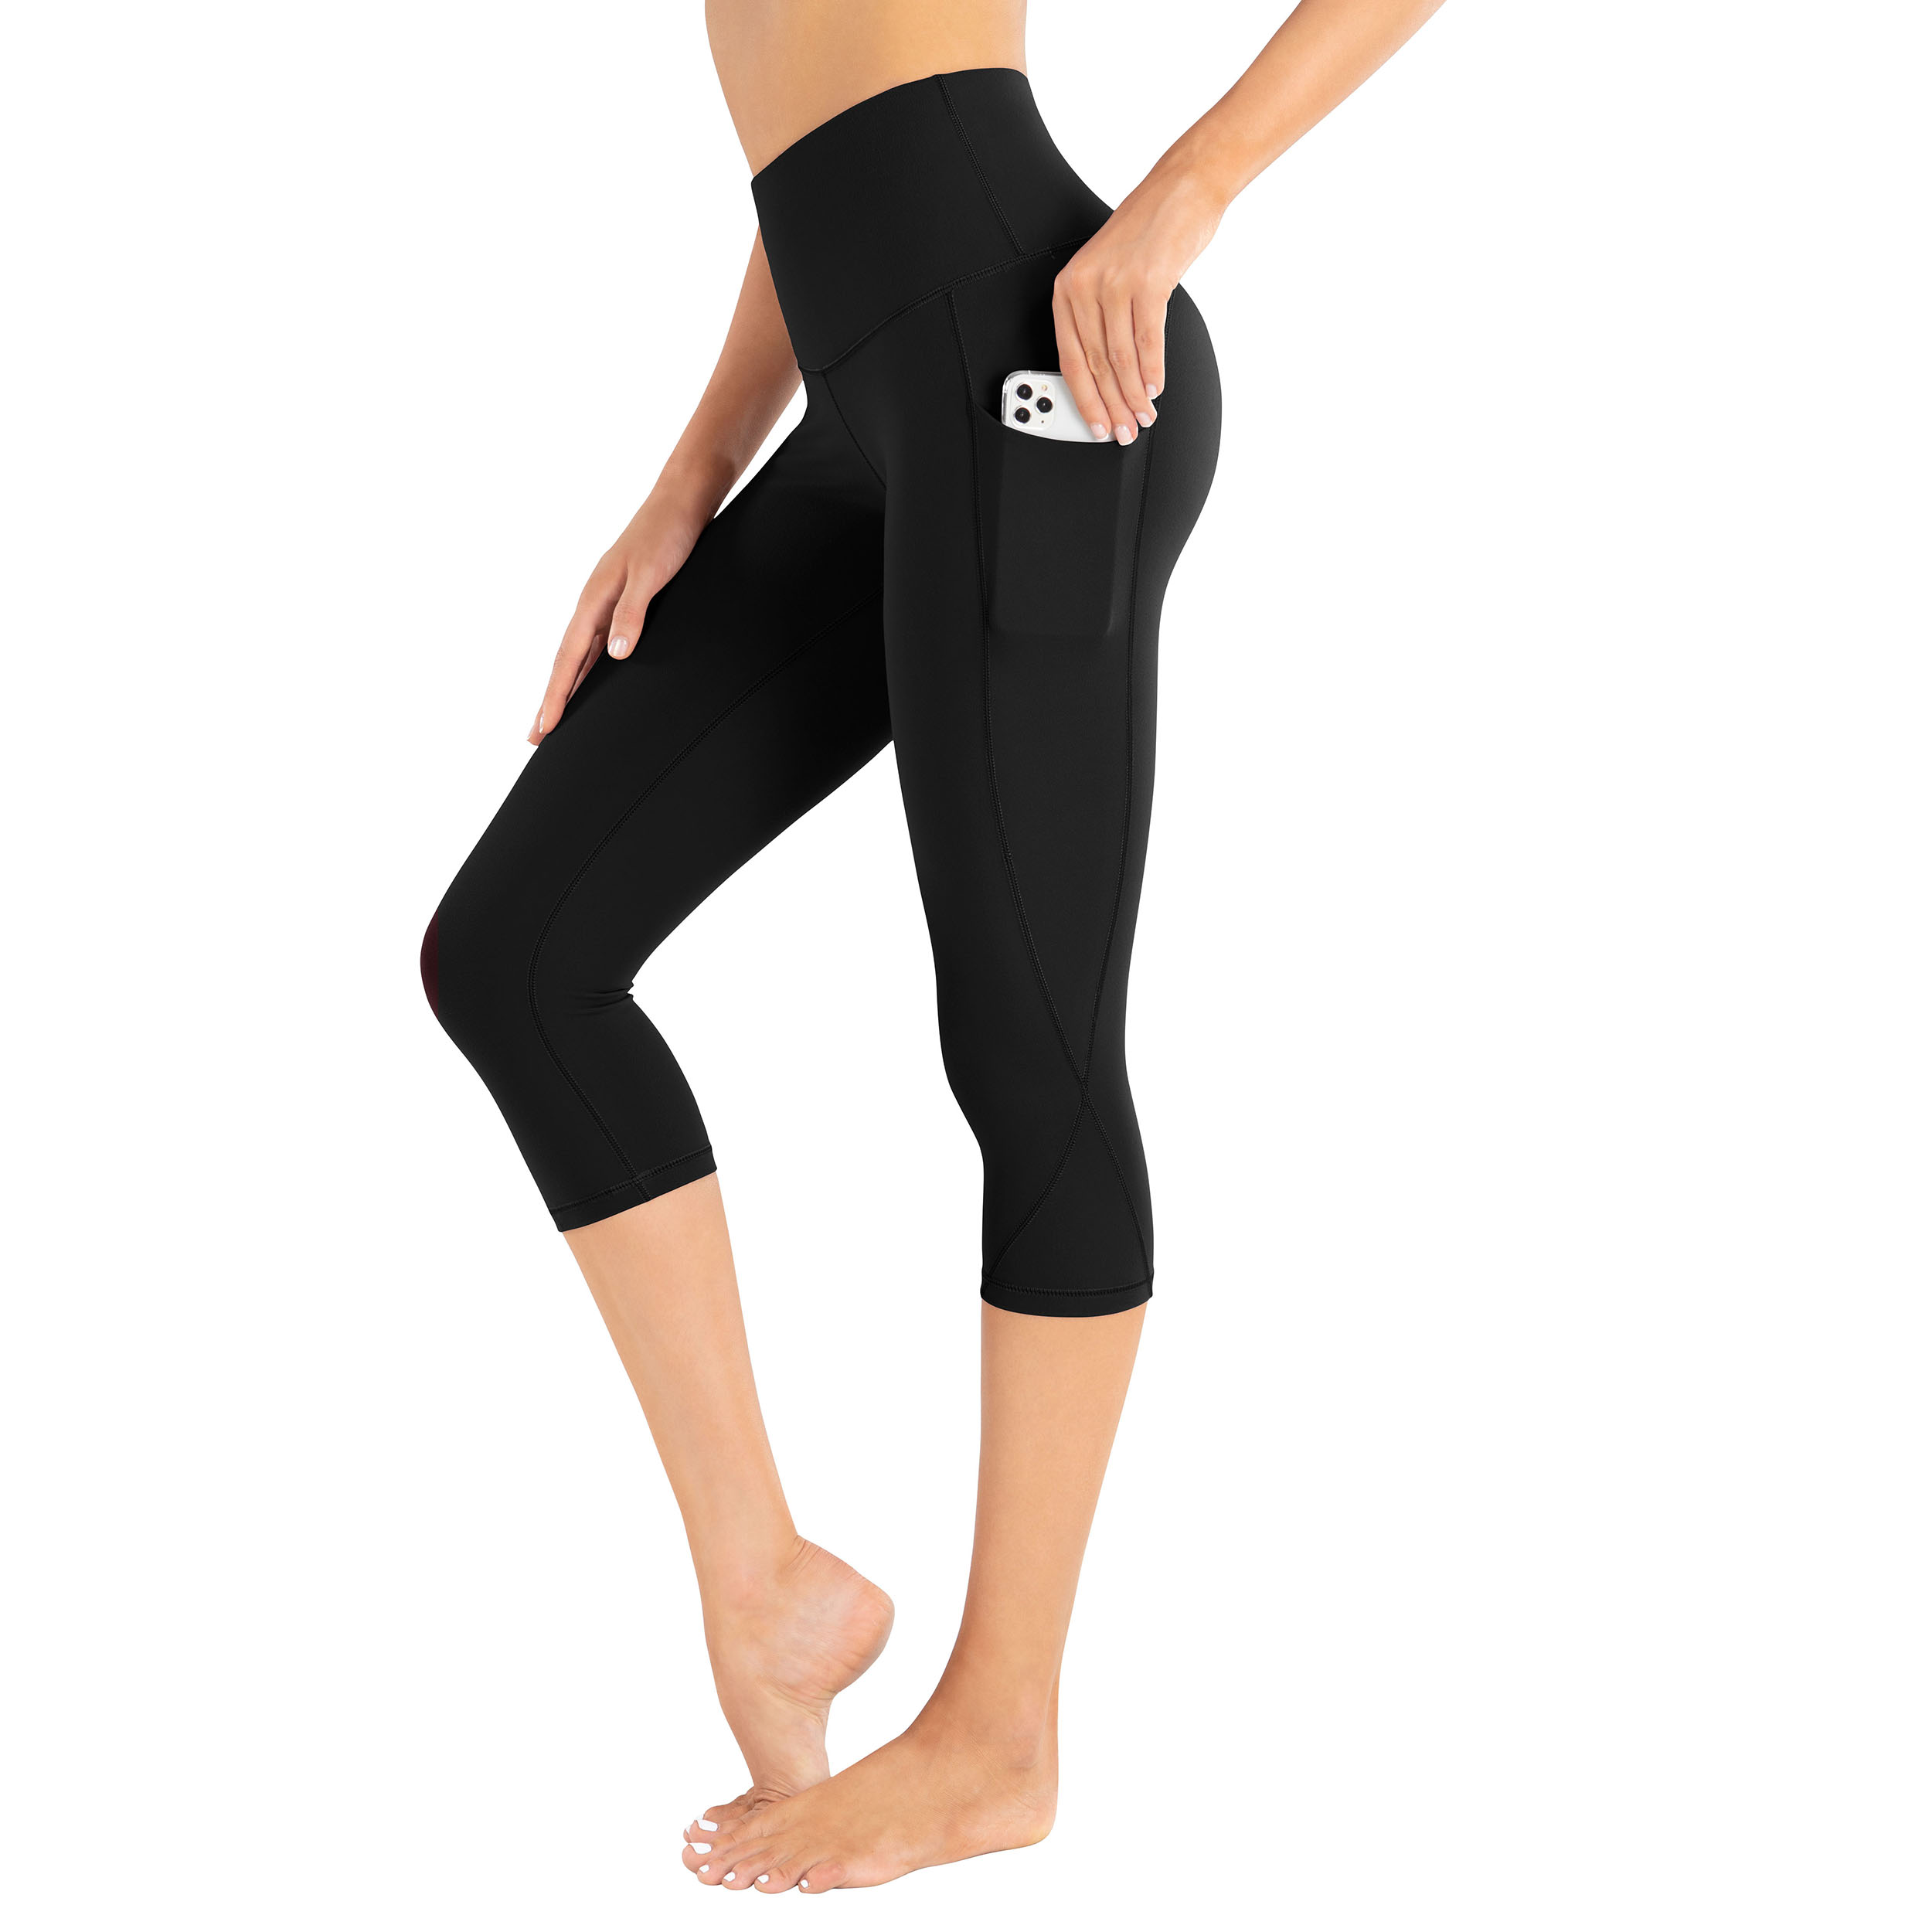 High Waisted Yoga Tummy Control Non-See Through Soft Full Length Yoga Pants Fitarget Workout Leggings for Women with Pocket 